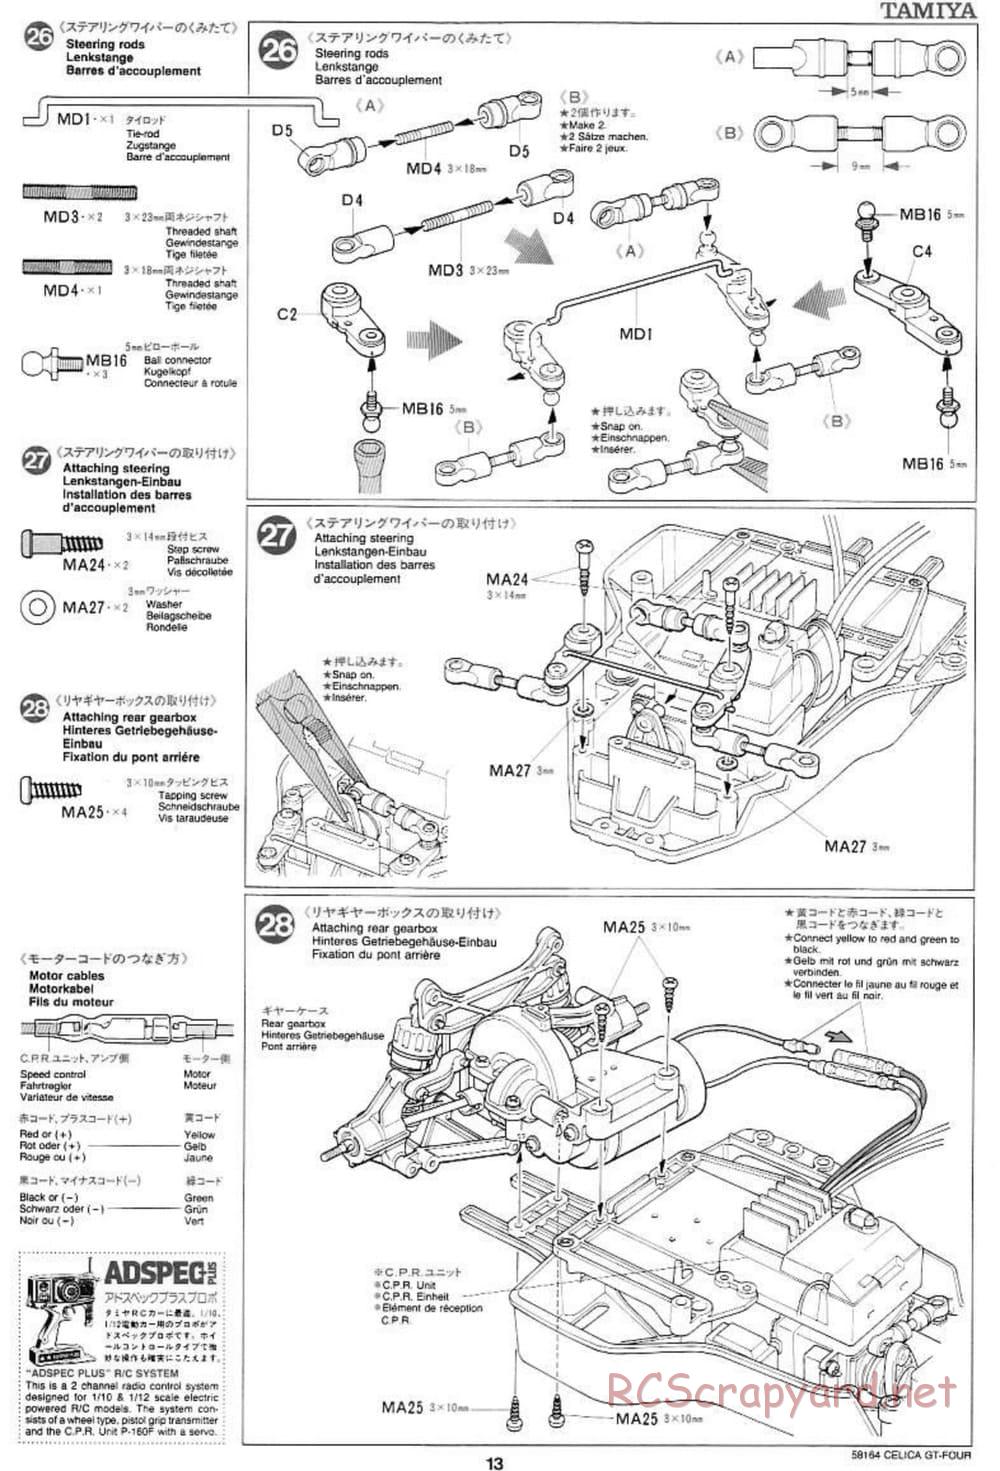 Tamiya - Toyota Celica GT Four - TA-02 Chassis - Manual - Page 13